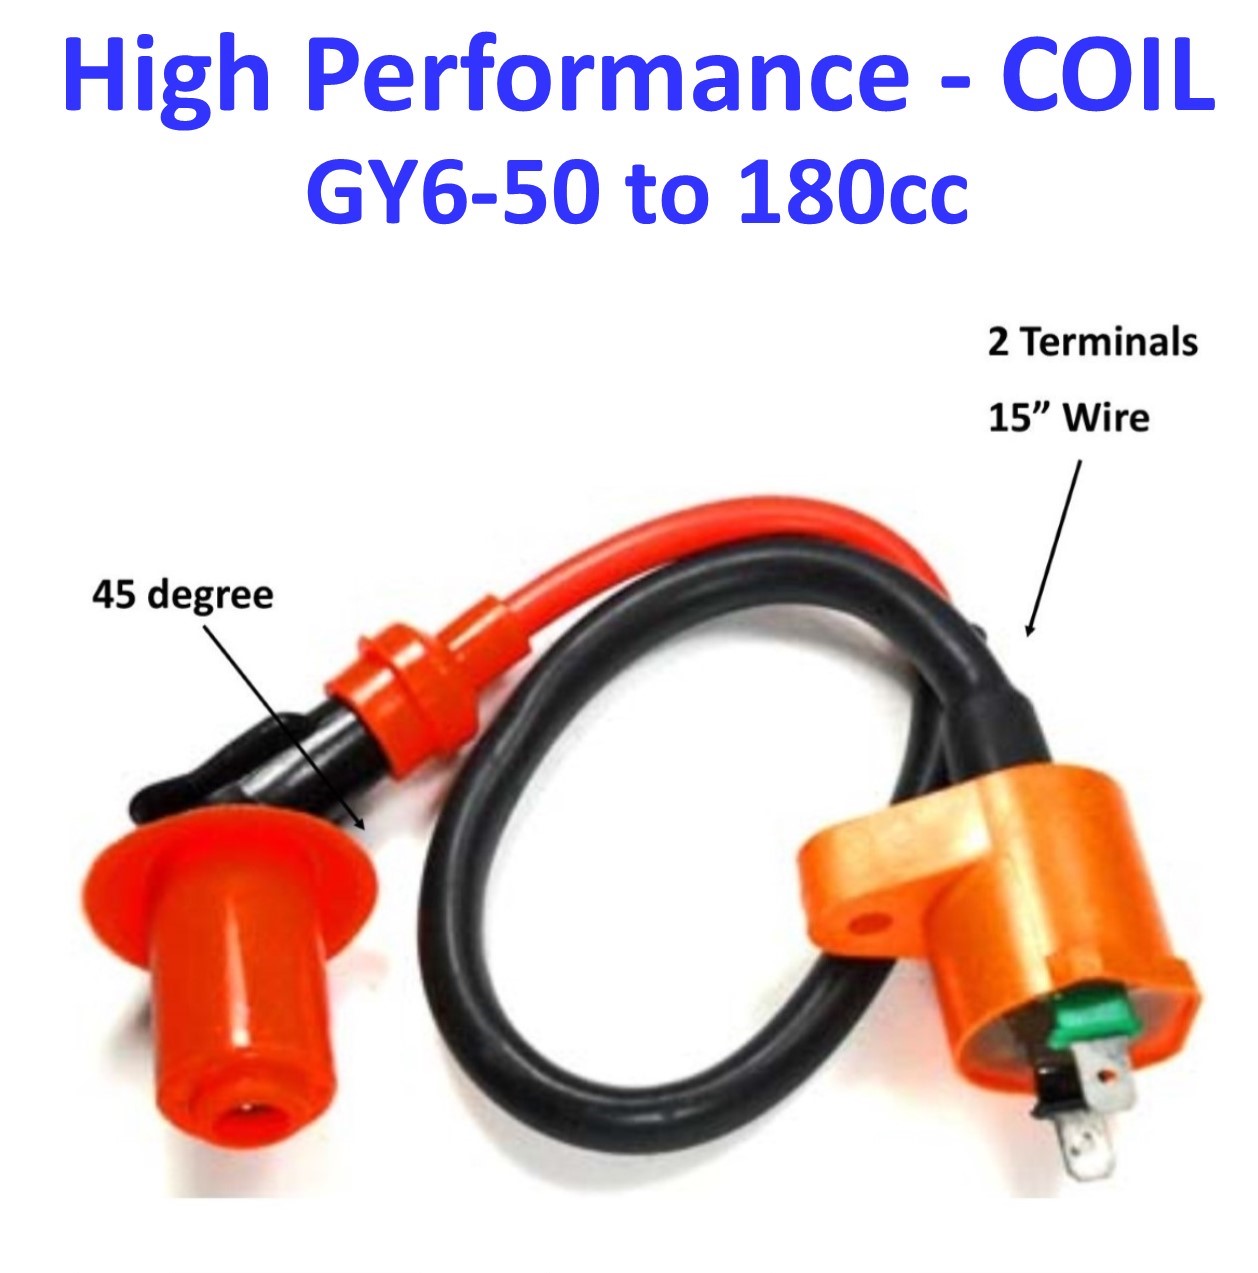 HIGH PERFORMANCE Ignition Coil Wire=15" Fits Most ATVs, GoKarts, Scooters With GY6-50,125,150,180cc Motors - Click Image to Close